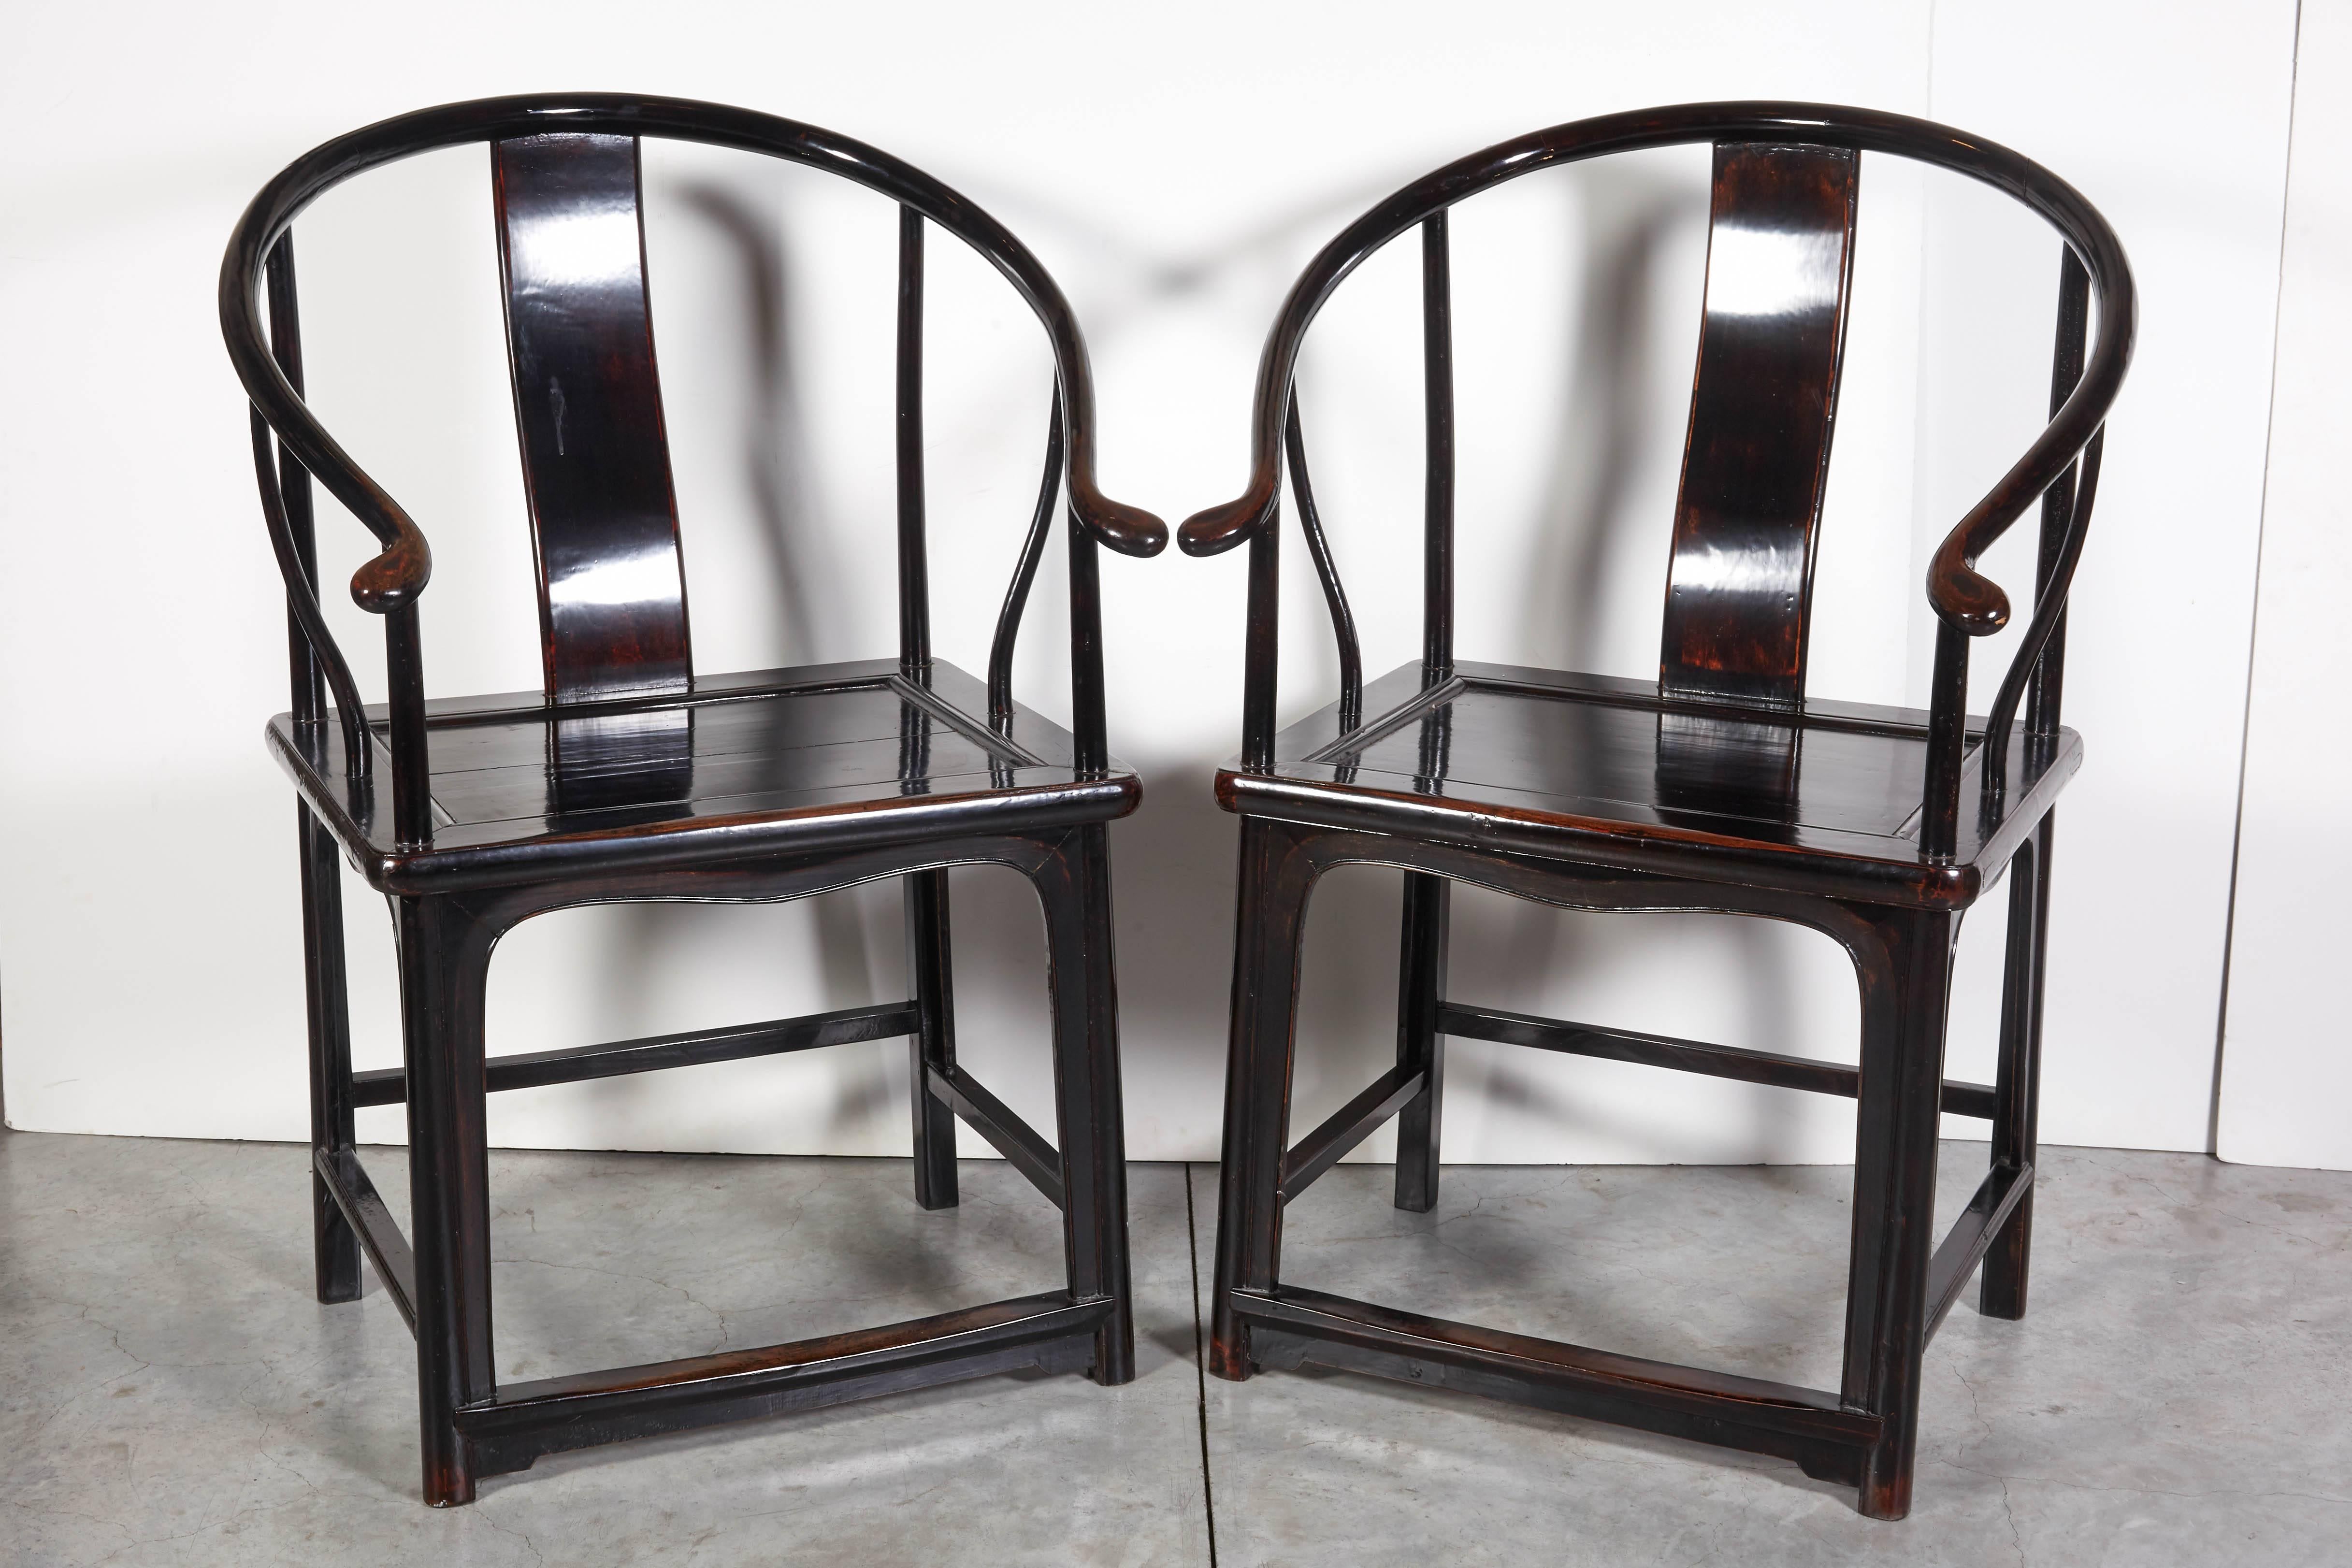 An unusually beautiful pair of antique Chinese horseshoe back chairs with striking lacquer finish. These gracefully shaped chairs will add a touch of elegance to any space.
Dimensions: L 26, D 21 seat H 20, back H 39.5.